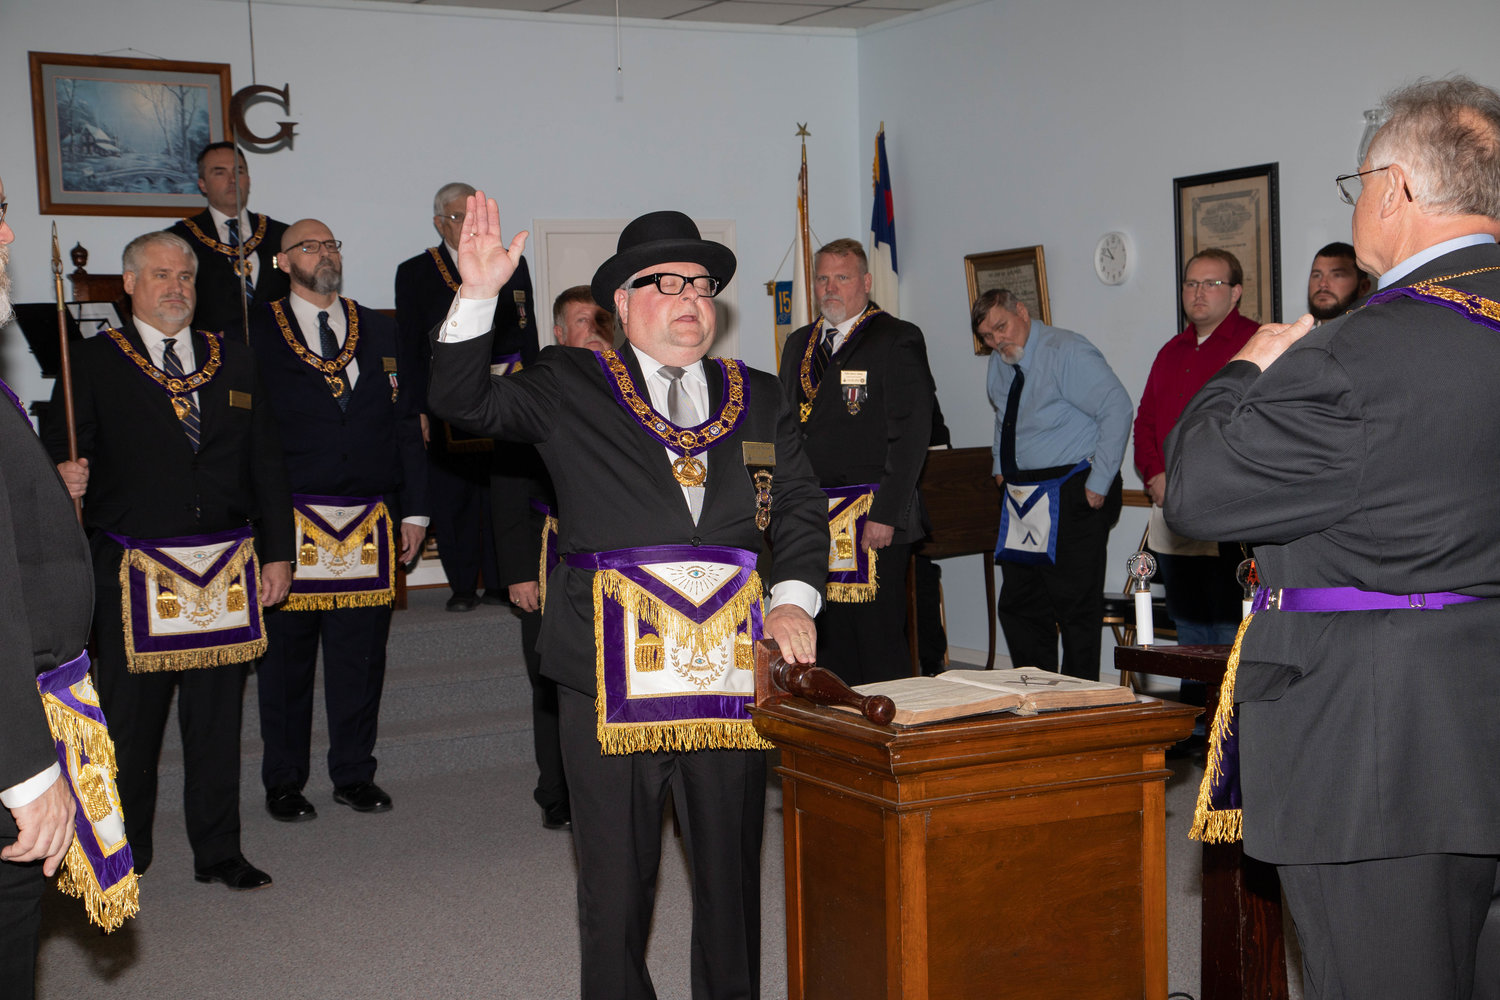 Grand Master Ty G. Treutelaar conducts a retirement ceremony for Milton Lodge 151 in Cairo. The Milton Lodge became part of the Cairo Lodge, bringing more than 160 years of history with it.